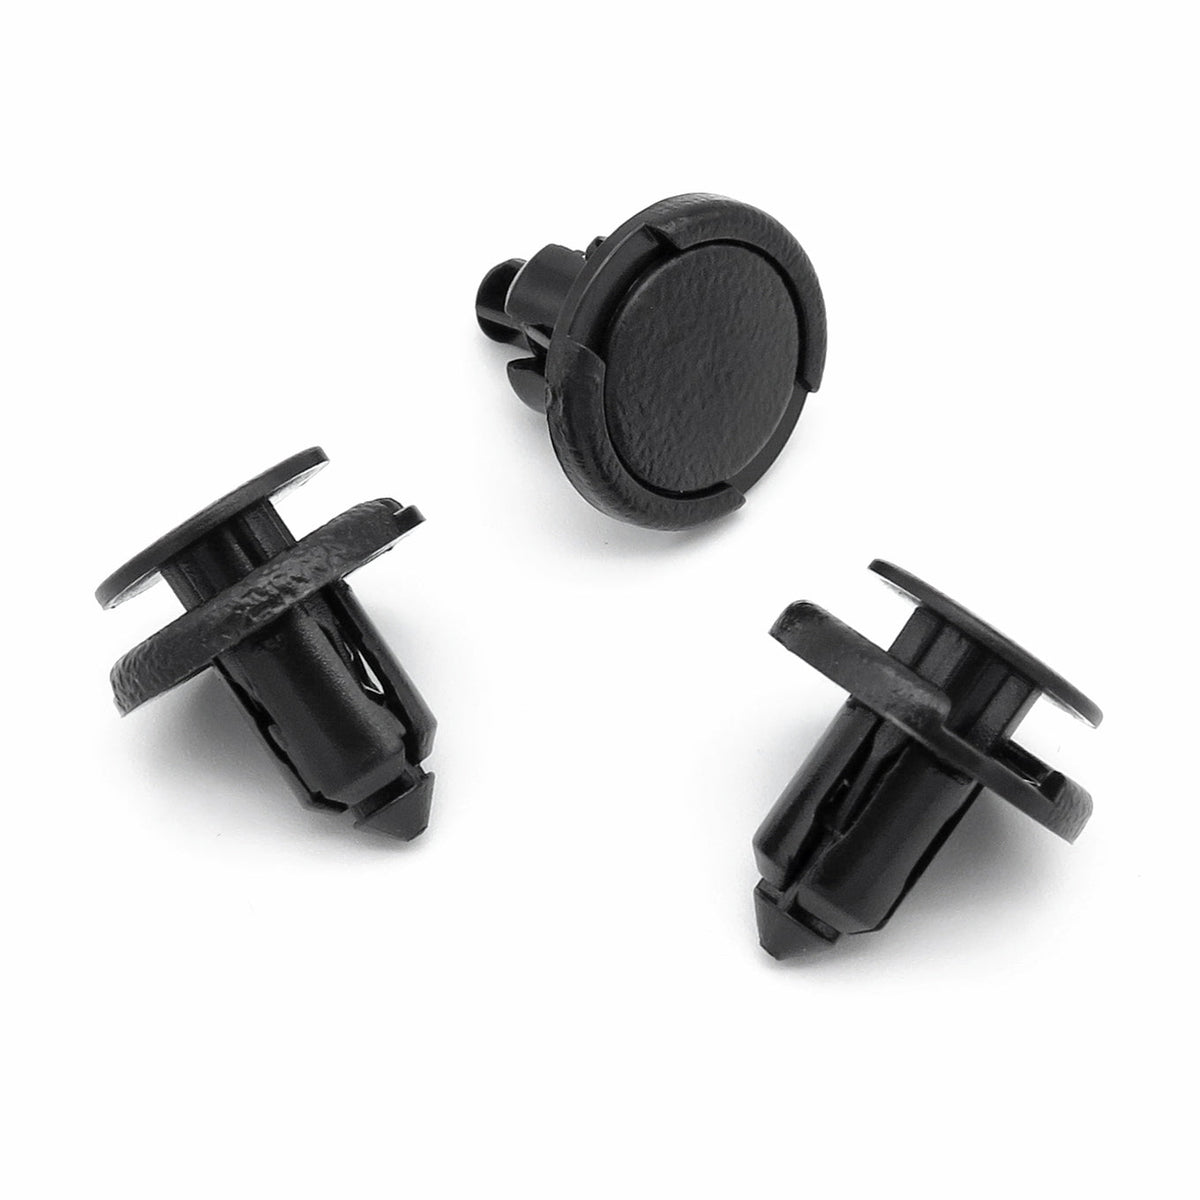 Are you looking for those hard to find Tesla Trim Rivets/Clips for